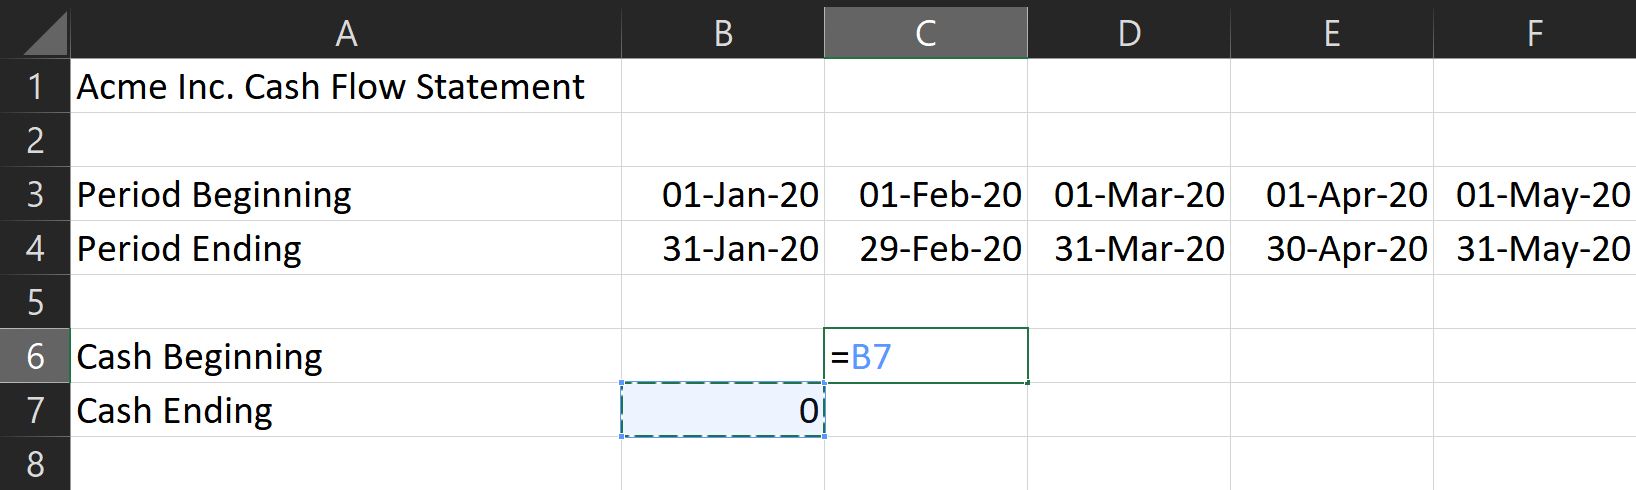 Using a formula to set cash beginning for the following months